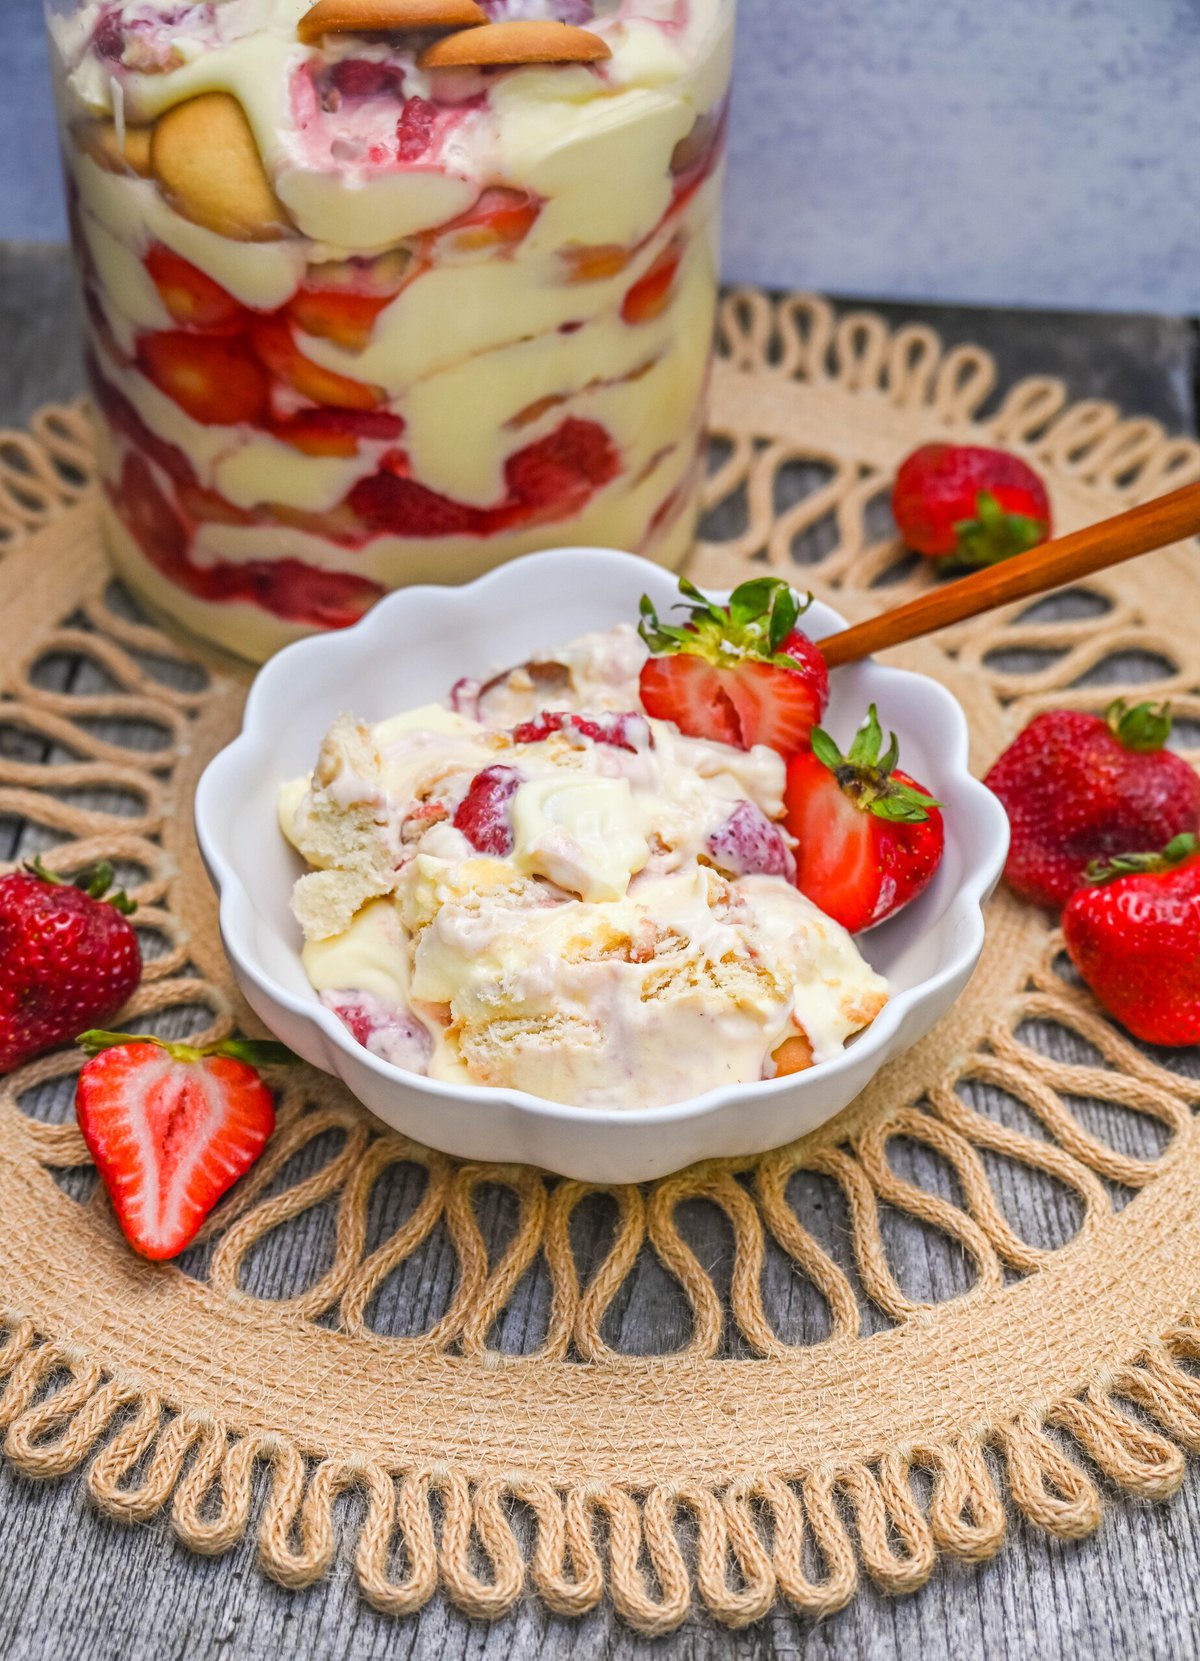 This Magnolia Bakery Strawberry Shortcake Pudding is such a quintessential summer dessert. It is made with fresh or roasted strawberries in a creamy vanilla pudding and whipped cream with Nilla wafers. This Strawberry Shortcake Pudding will be your favorite no-bake summer dessert recipe. This strawberry trifle will be a hit!